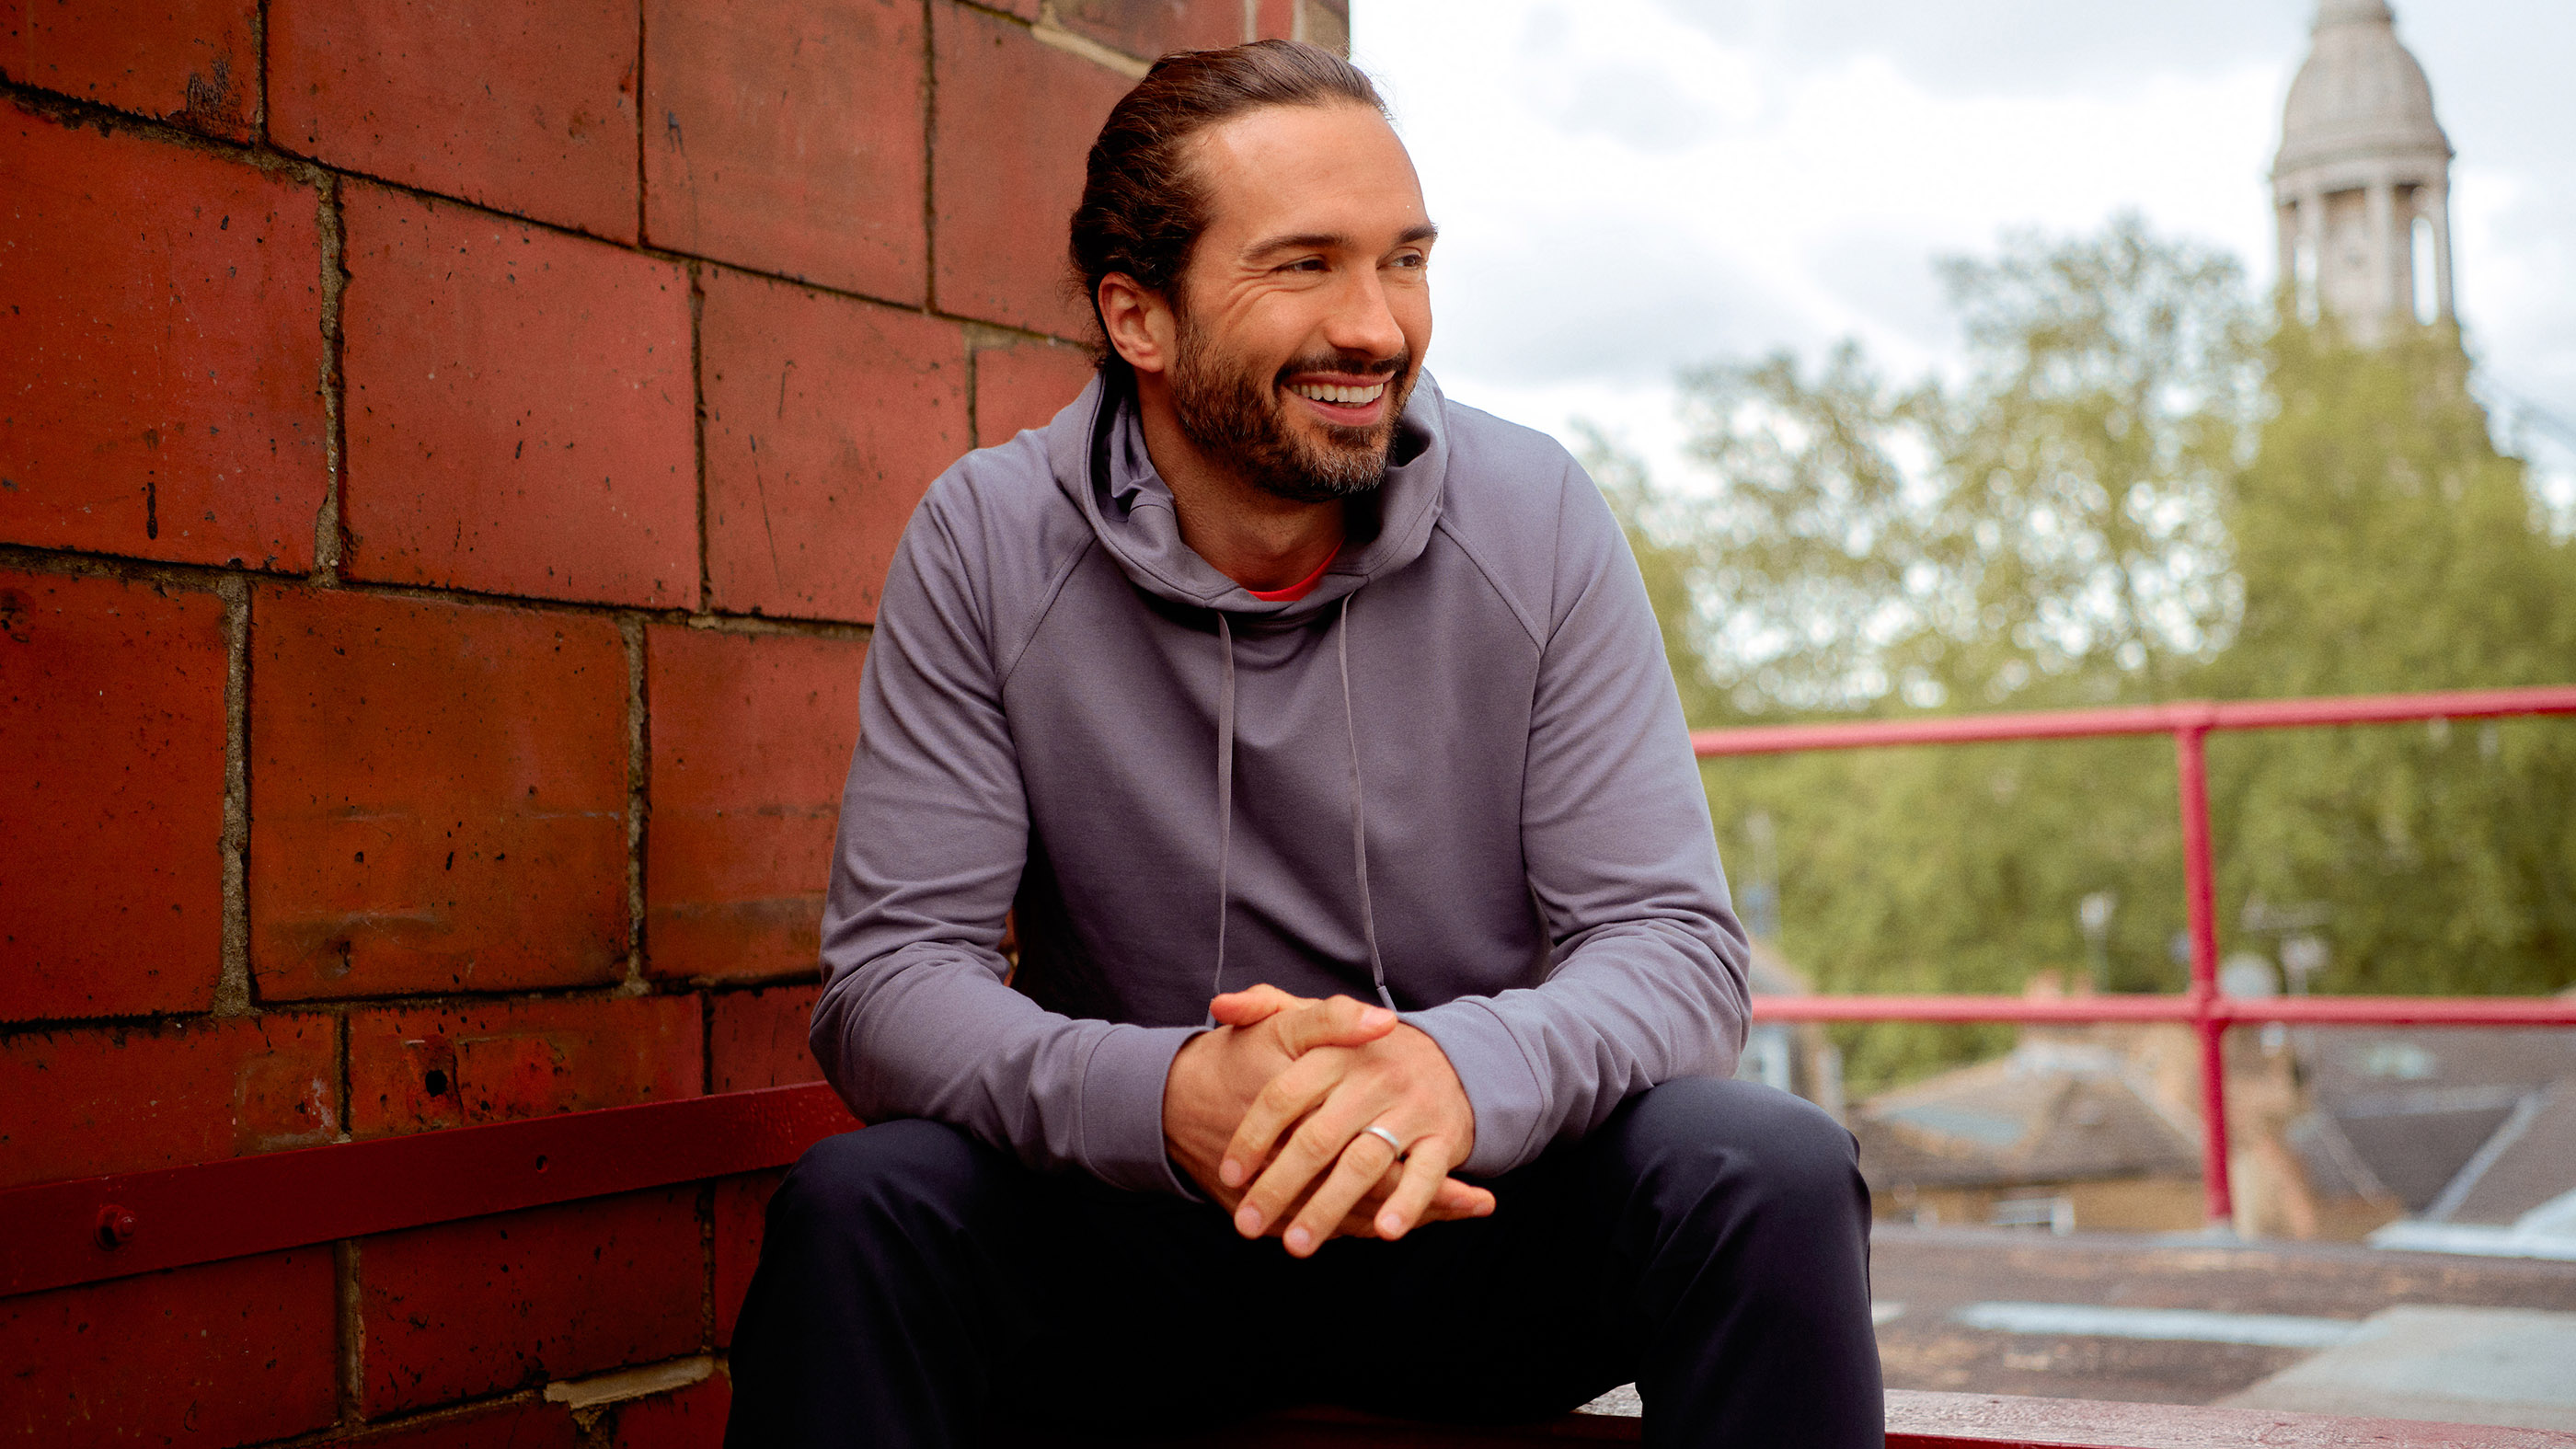 Stay fit with Joe Wicks on your screen: DVDs,  and more